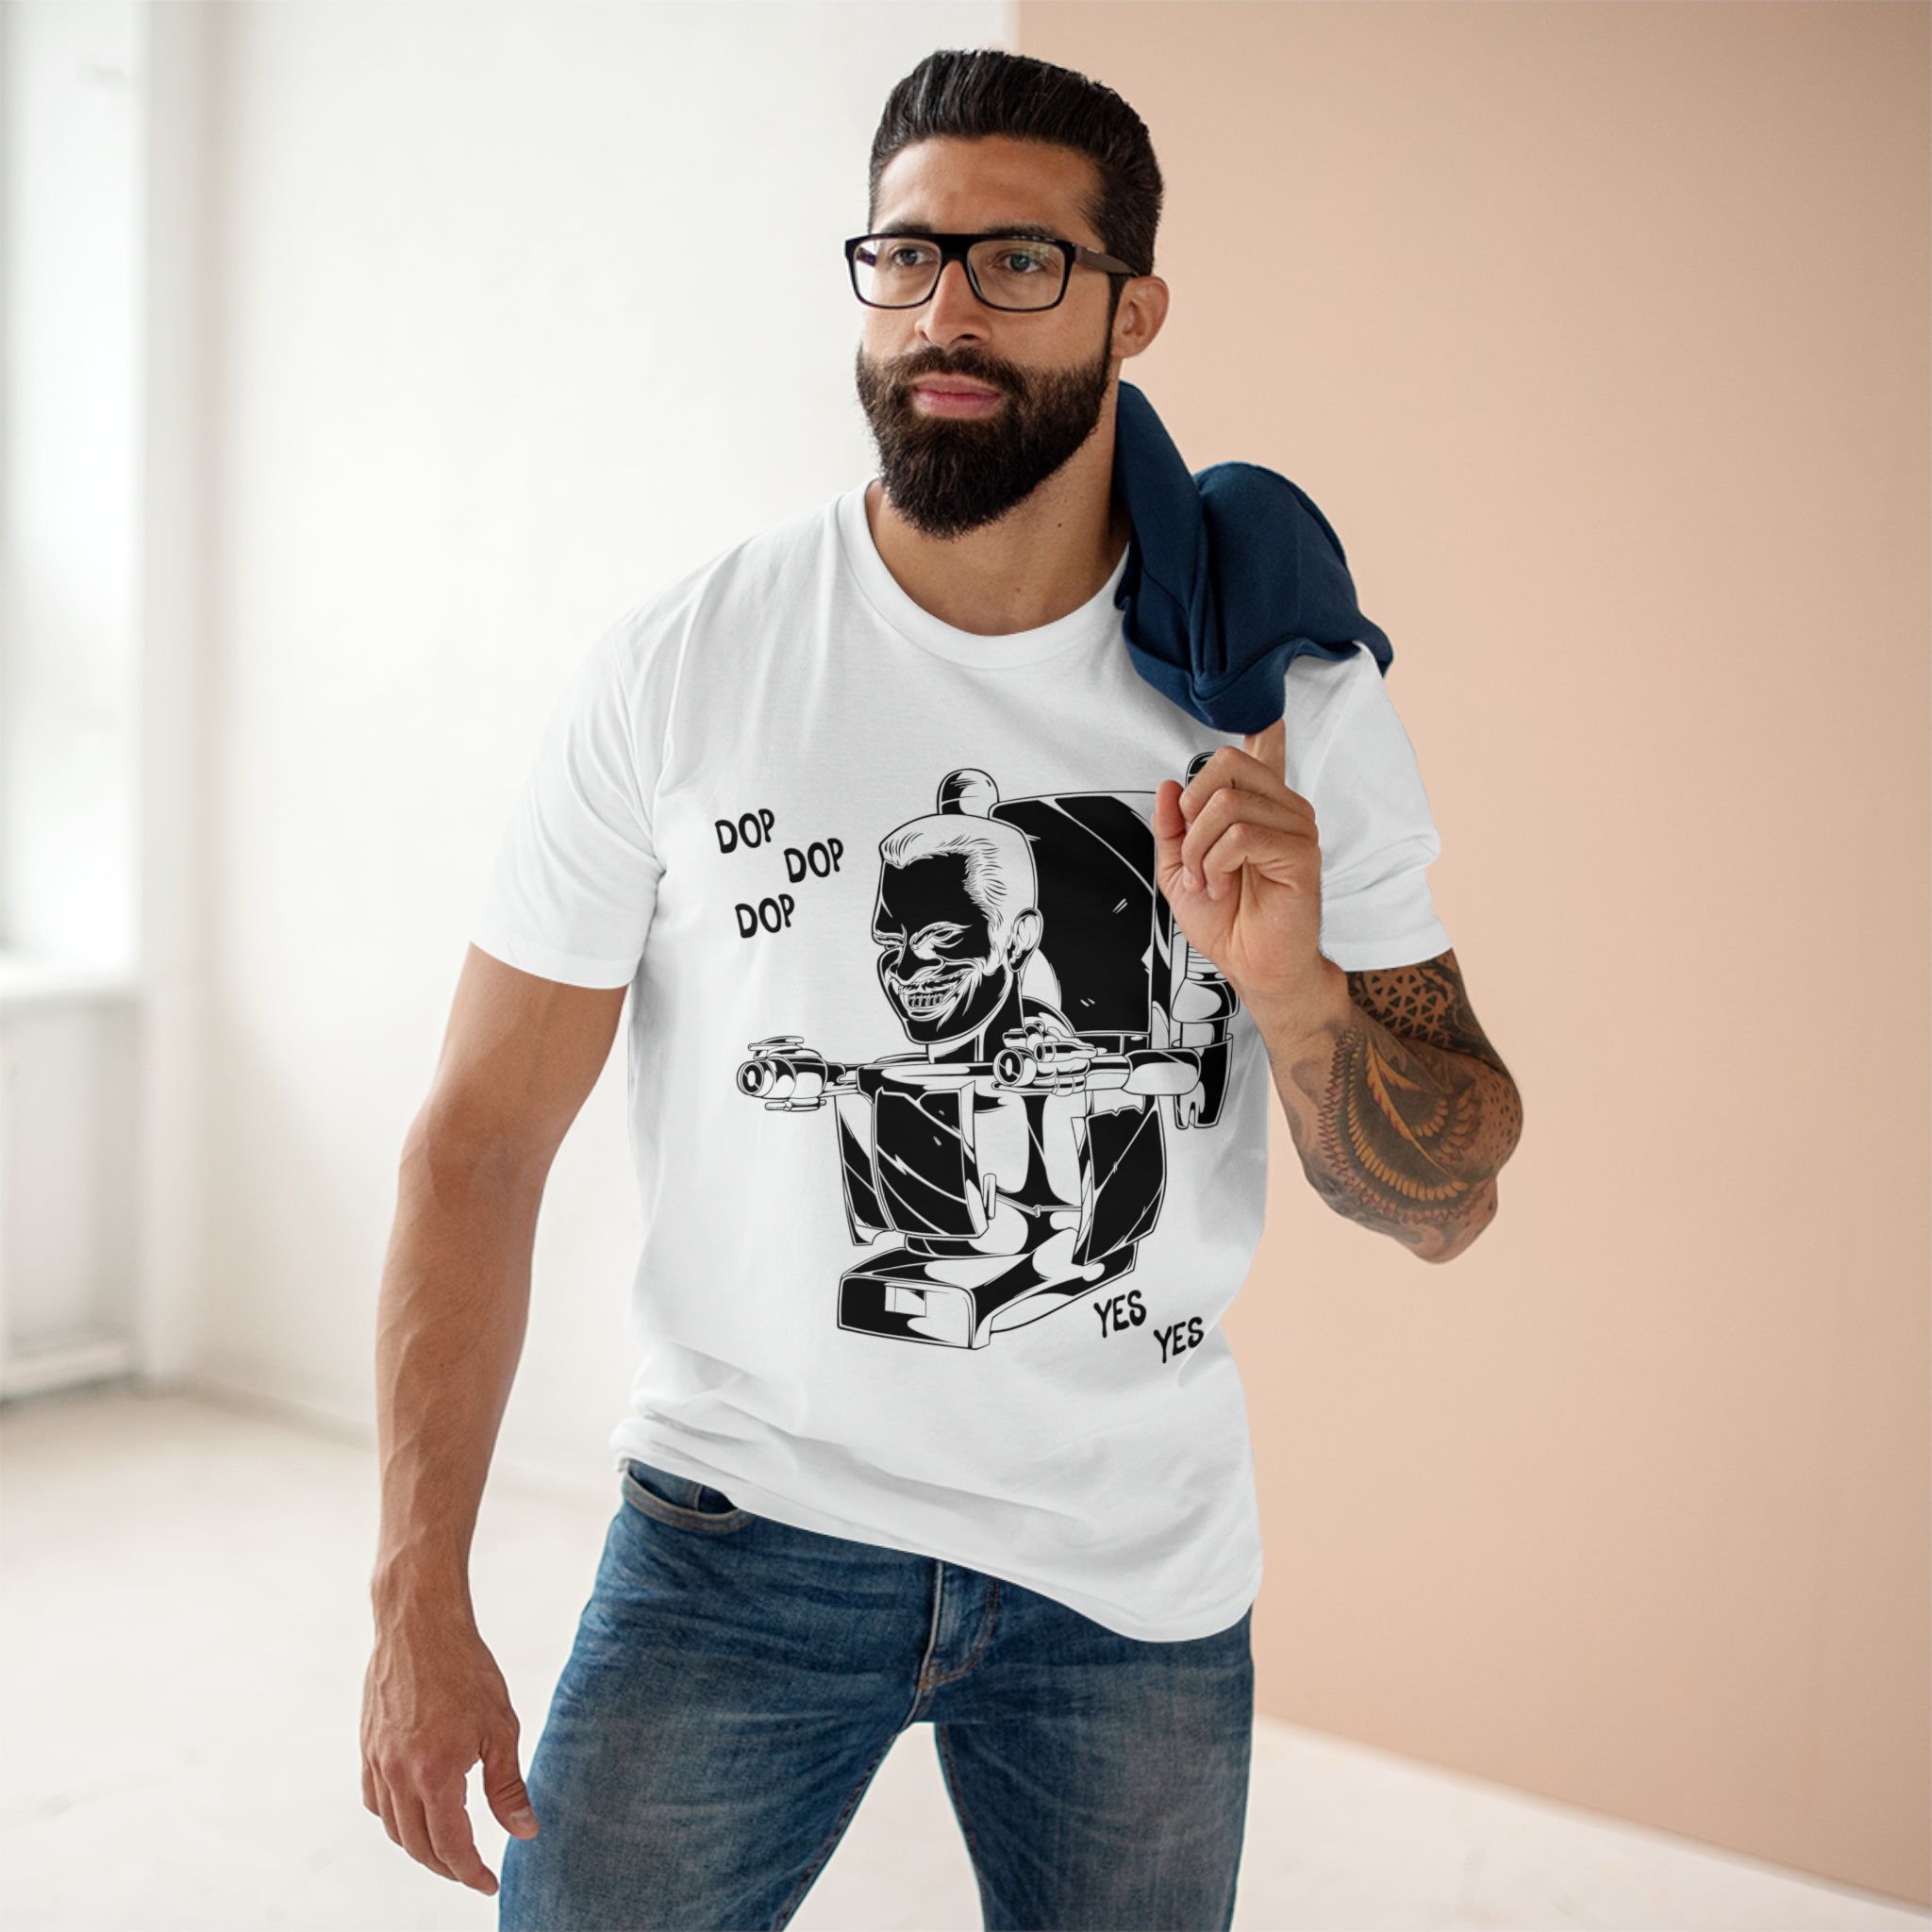 White tee with minimalistic G Man pop art on male model with glasses in room